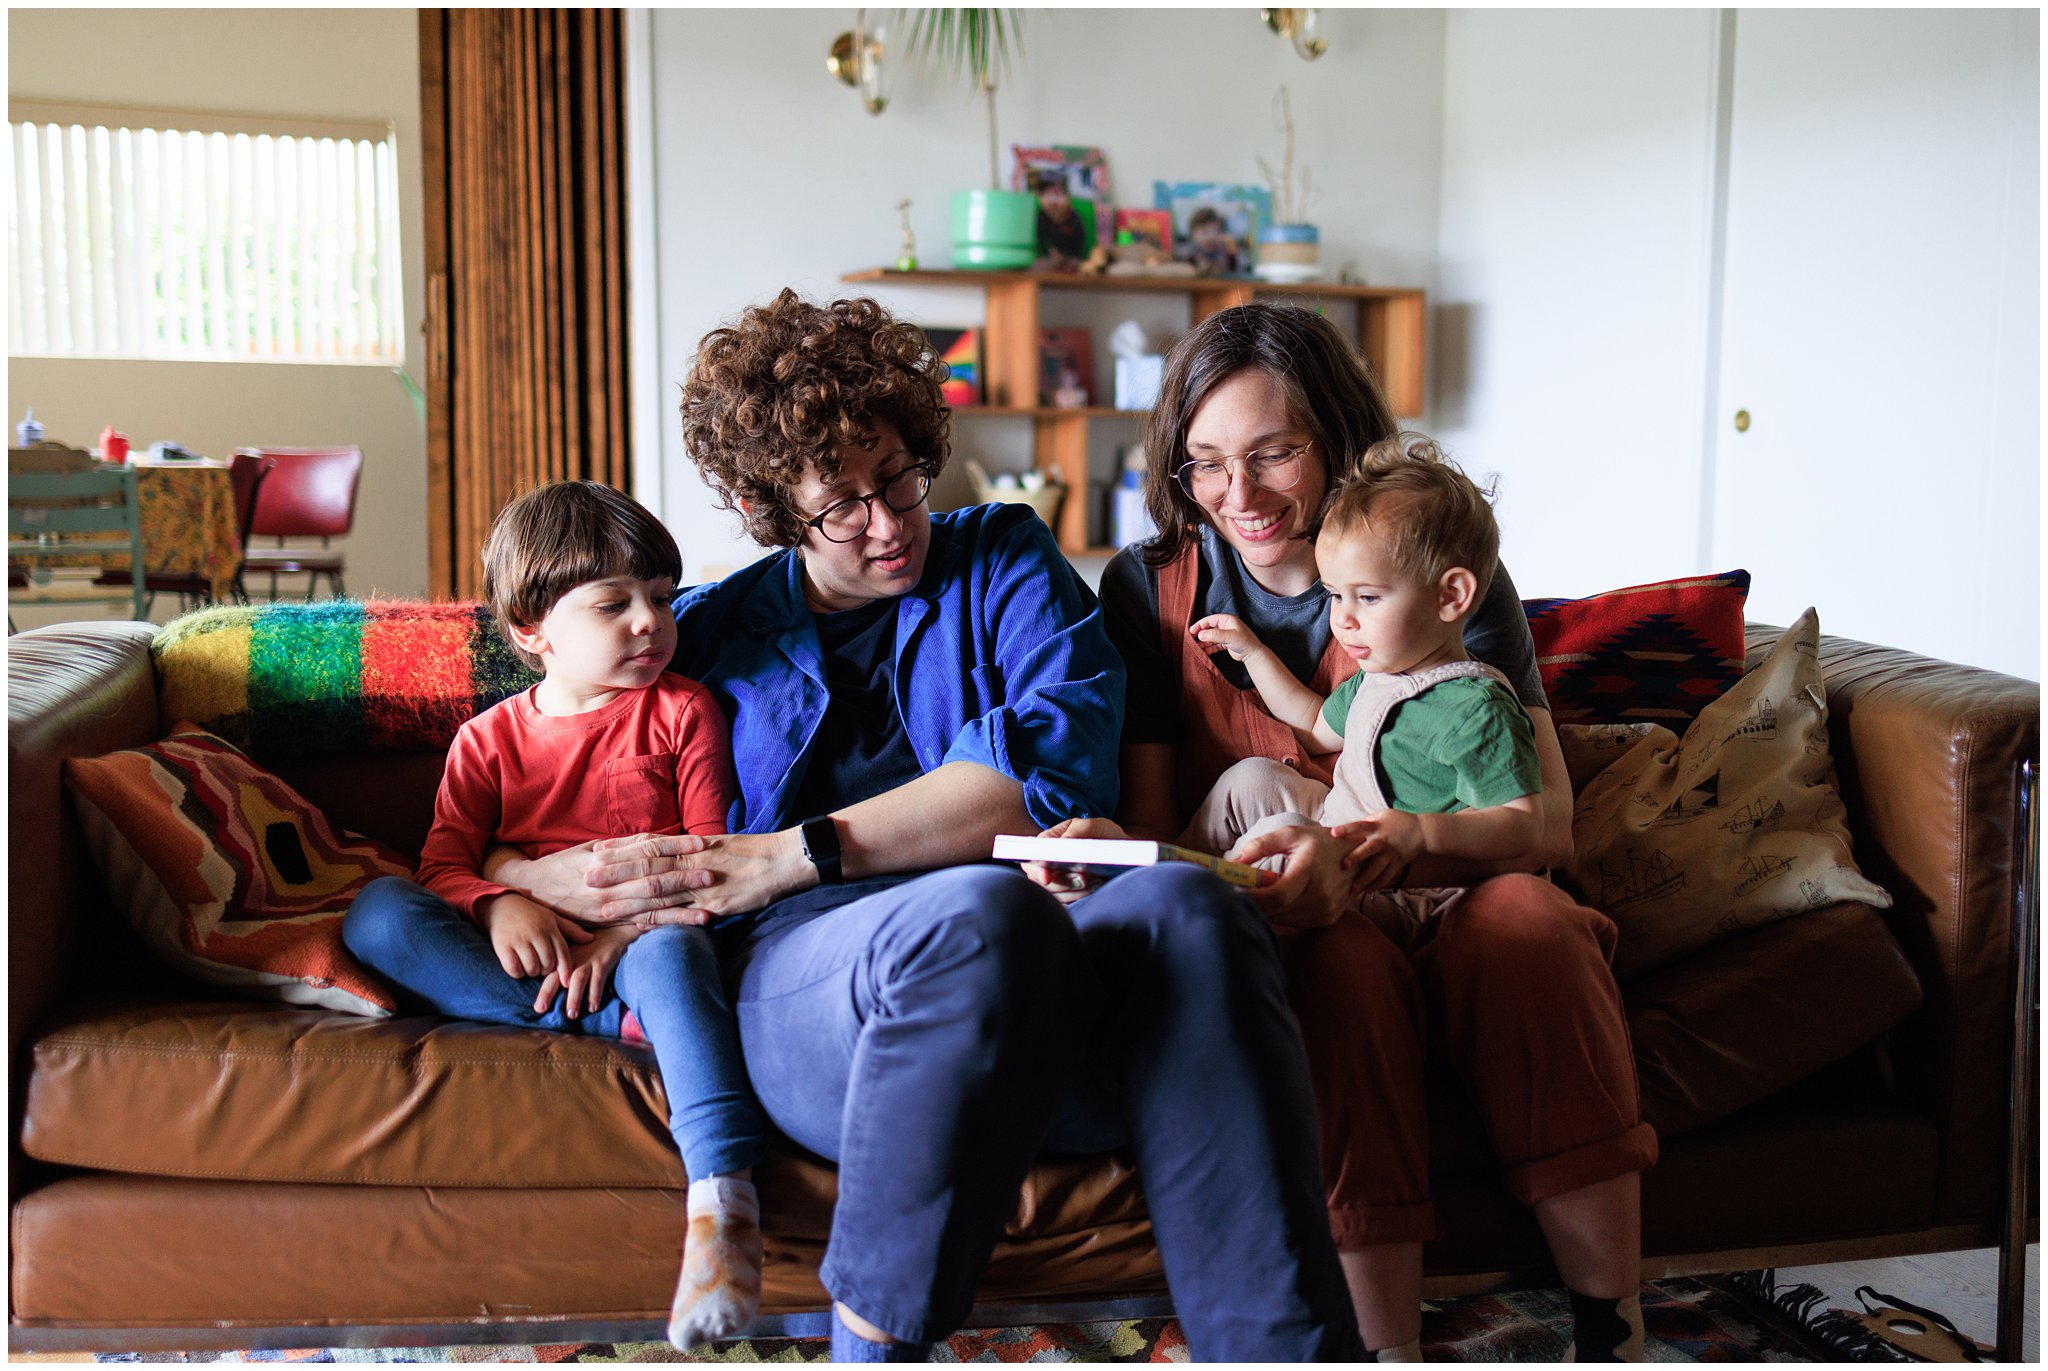 Family of four - two moms, toddler son, and baby girl - read books together on the couch.